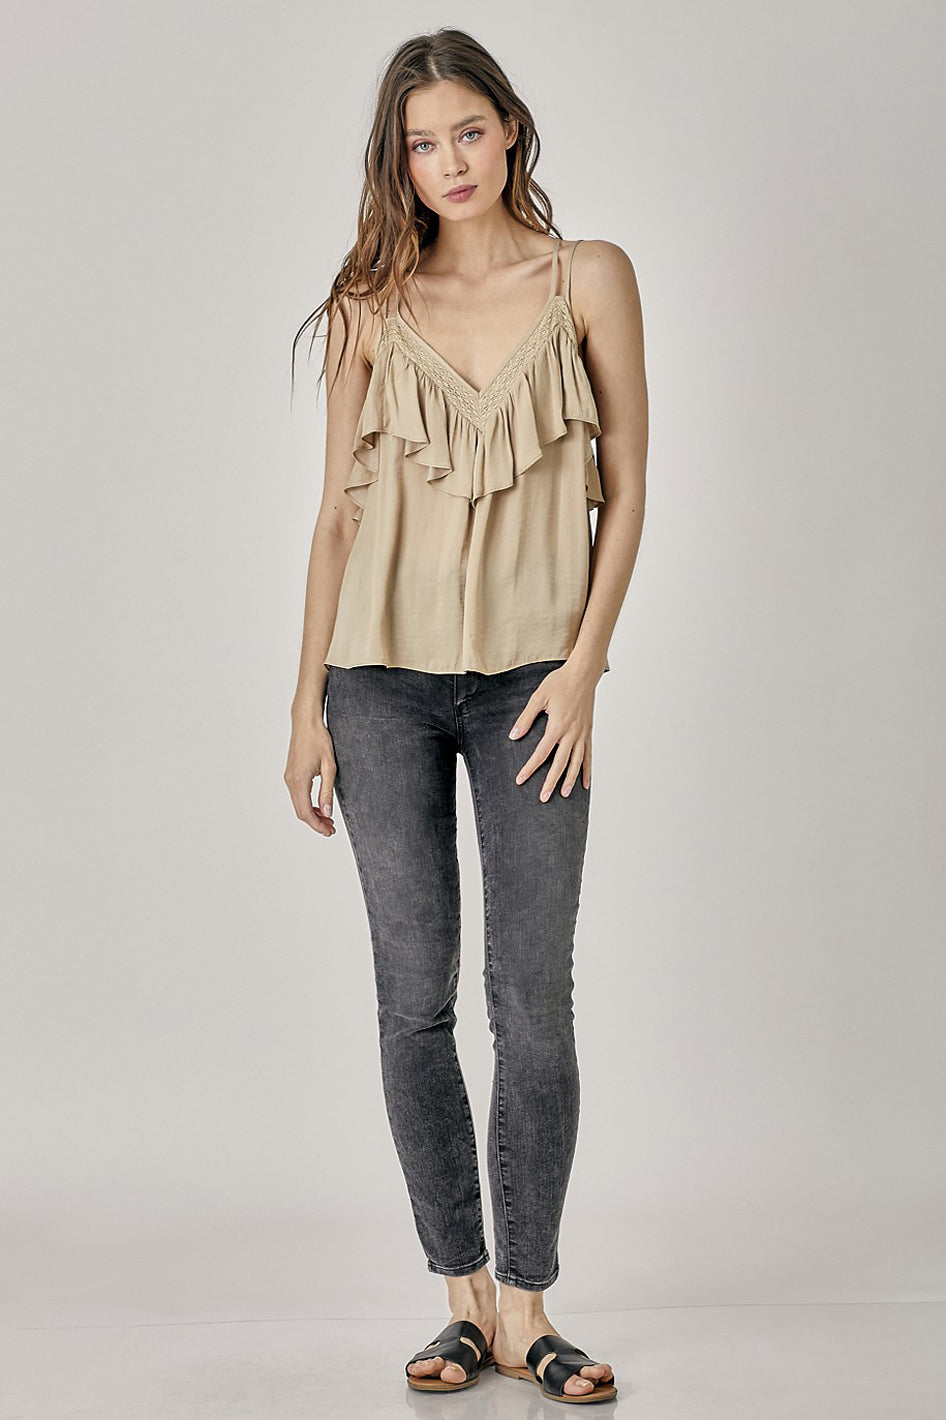 Trim Detail with Ruffle Cami Top - Azoroh